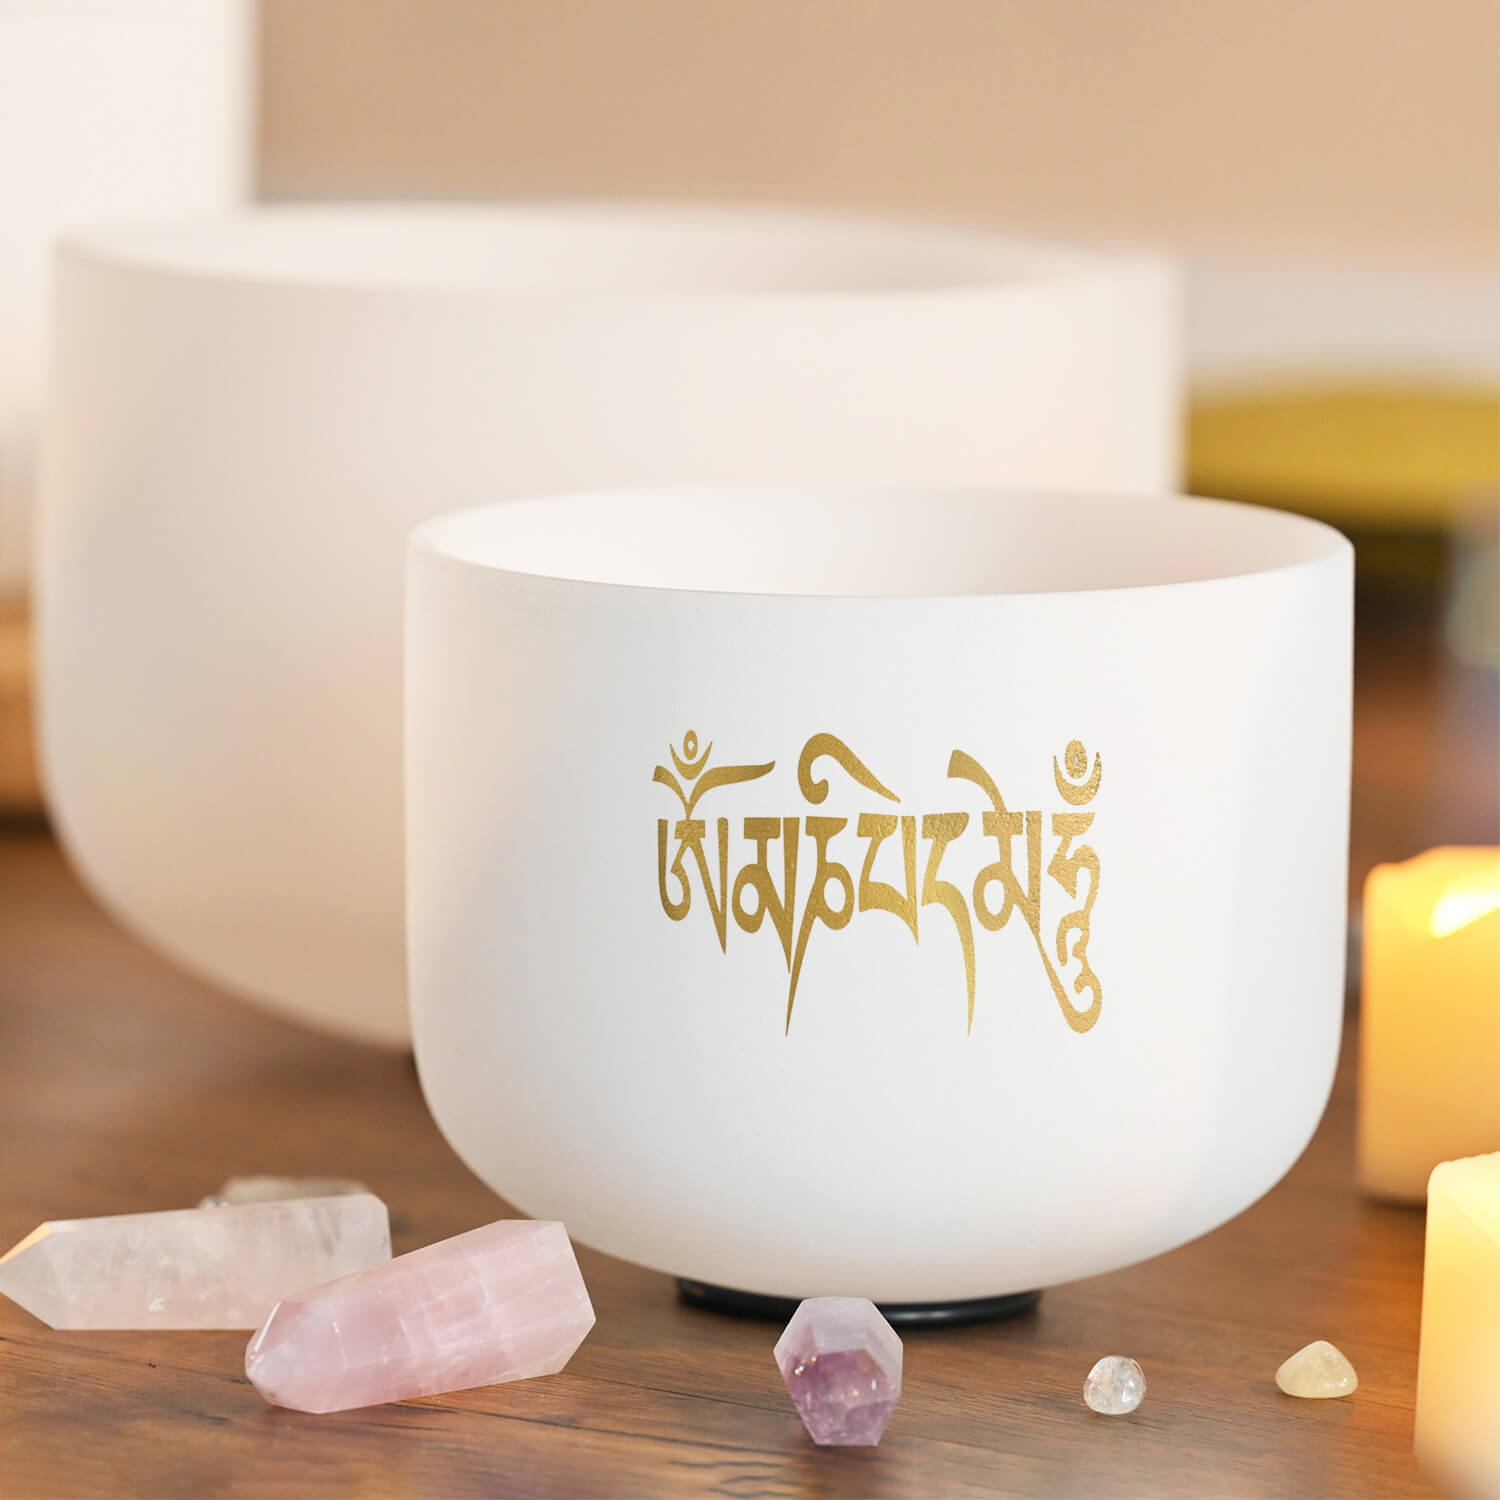 Six-Syllable Mantra Frosted Quartz Singing Bowl